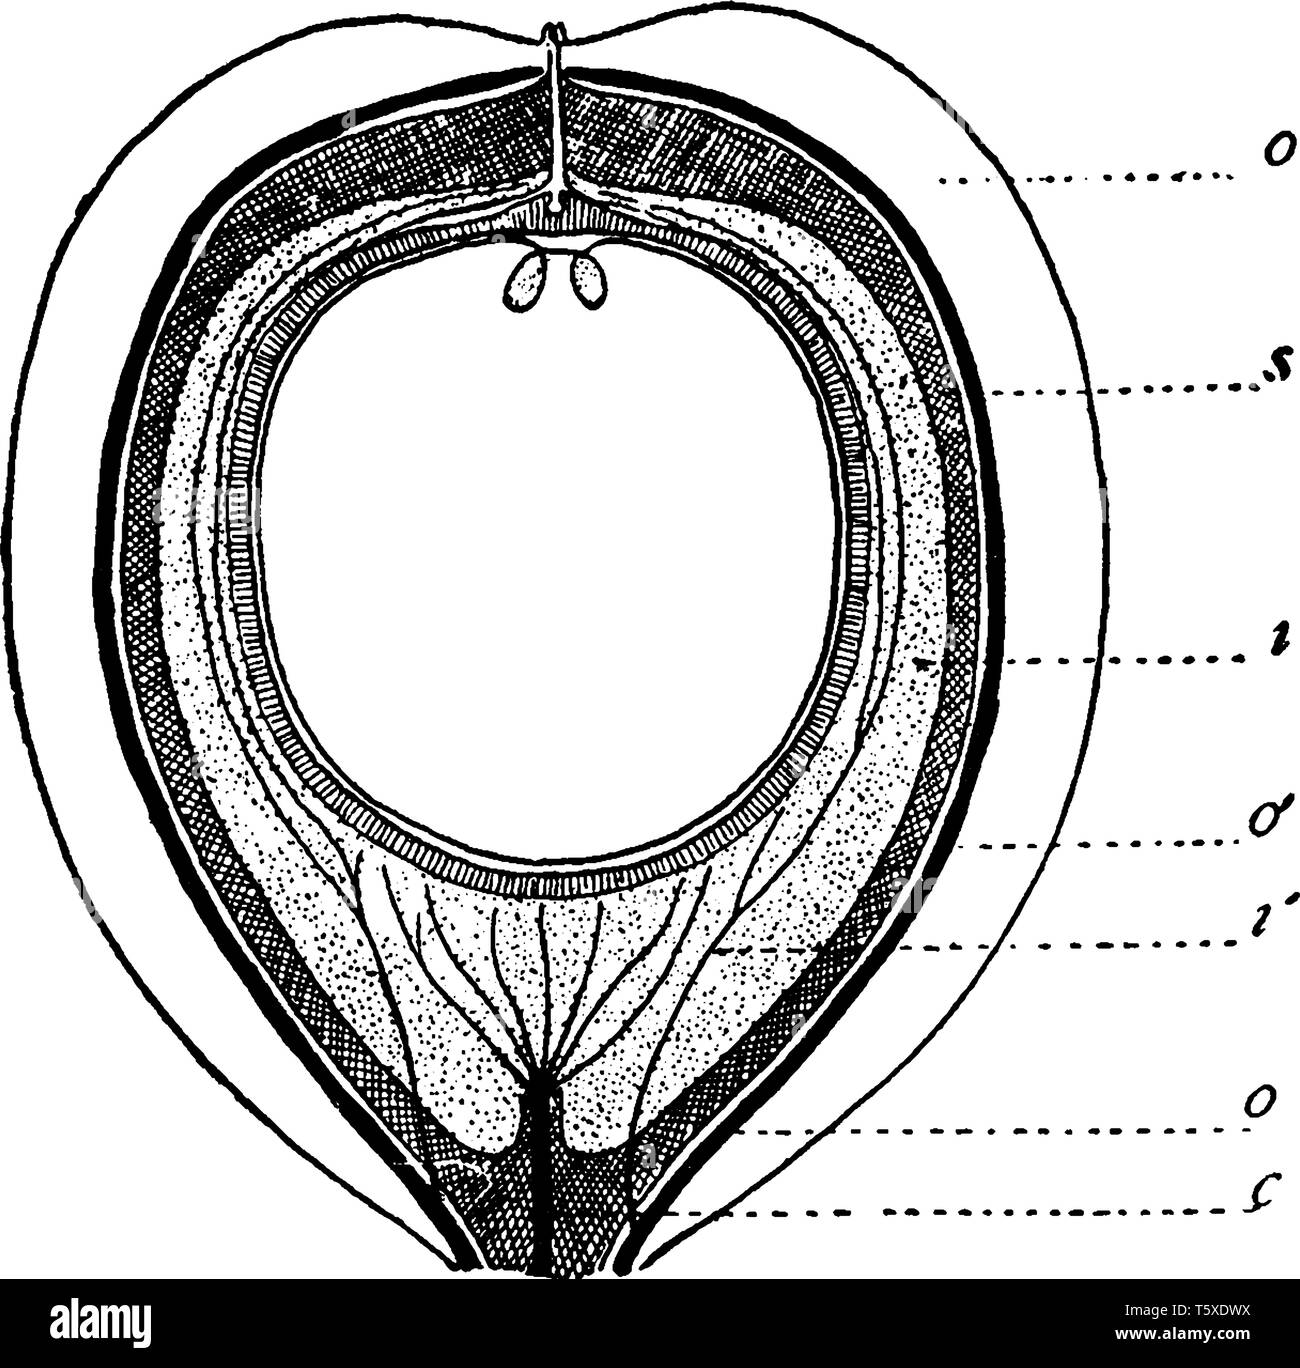 A picture showing the sections of seed. The section shows Cycas Circinalis, outer fleshy layer, inner fleshy layer and central vascular bundle, vintag Stock Vector